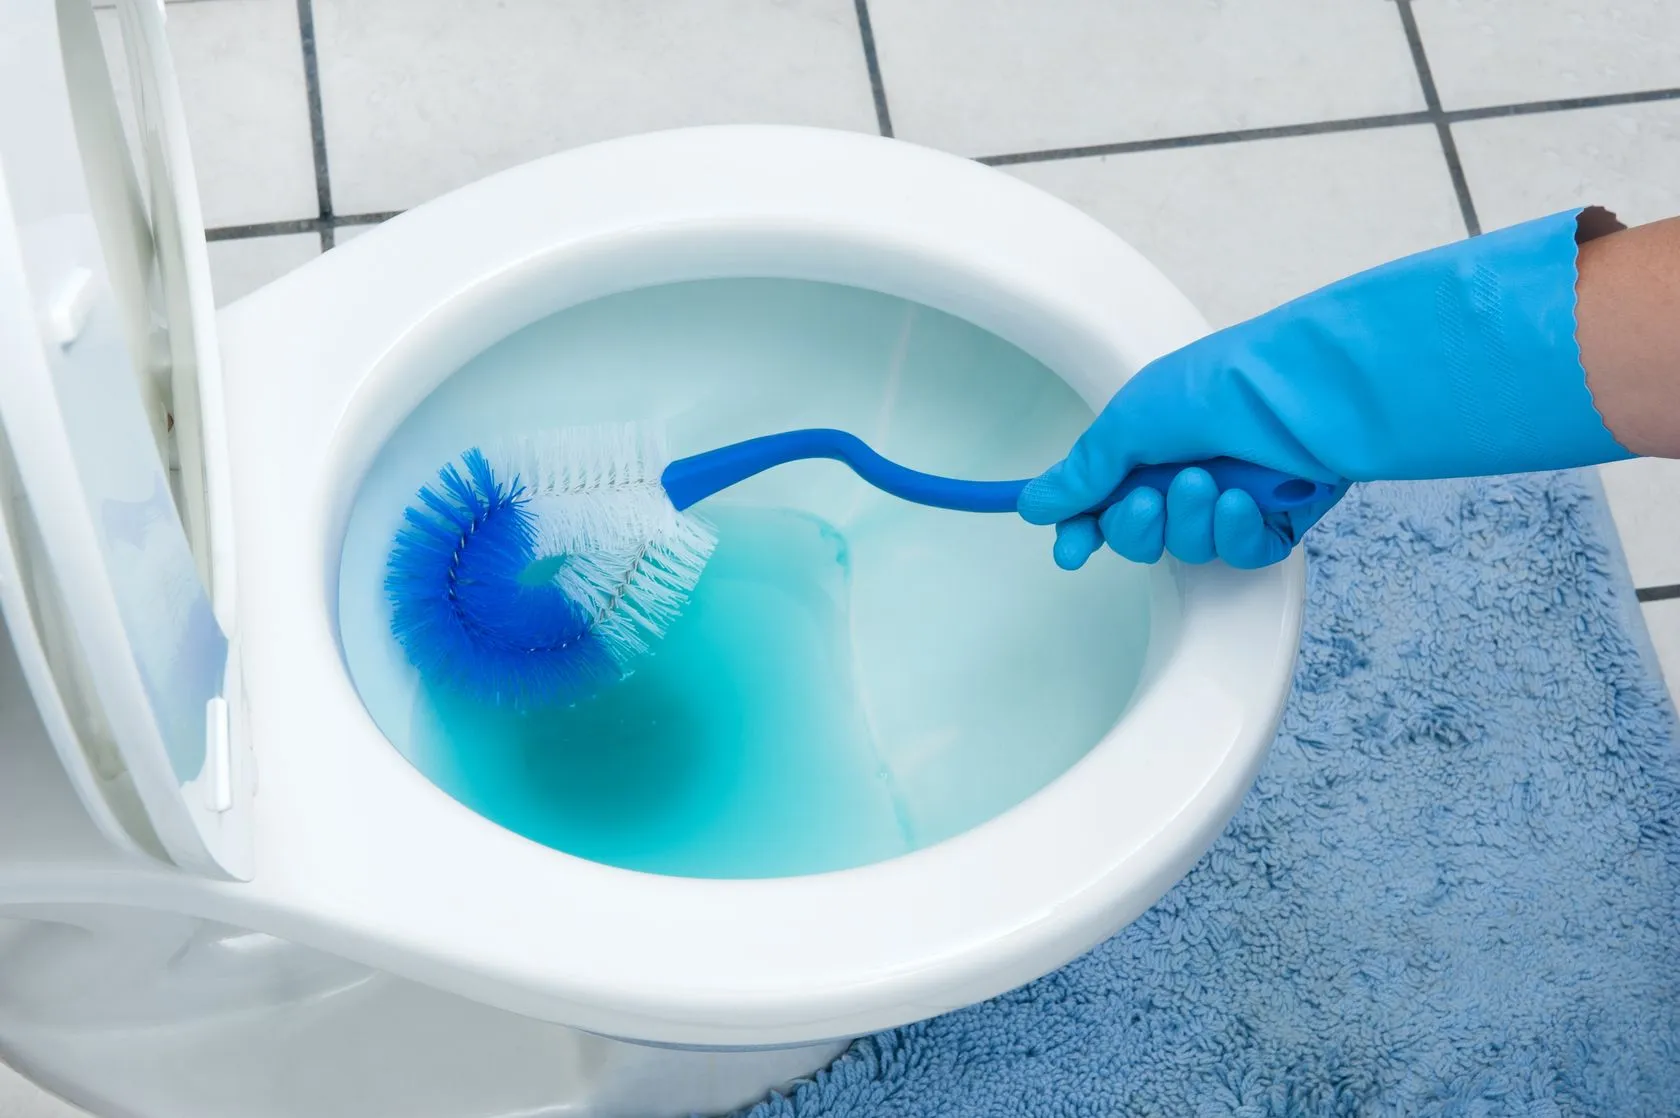 How to Clean the Rim of the Toilet?